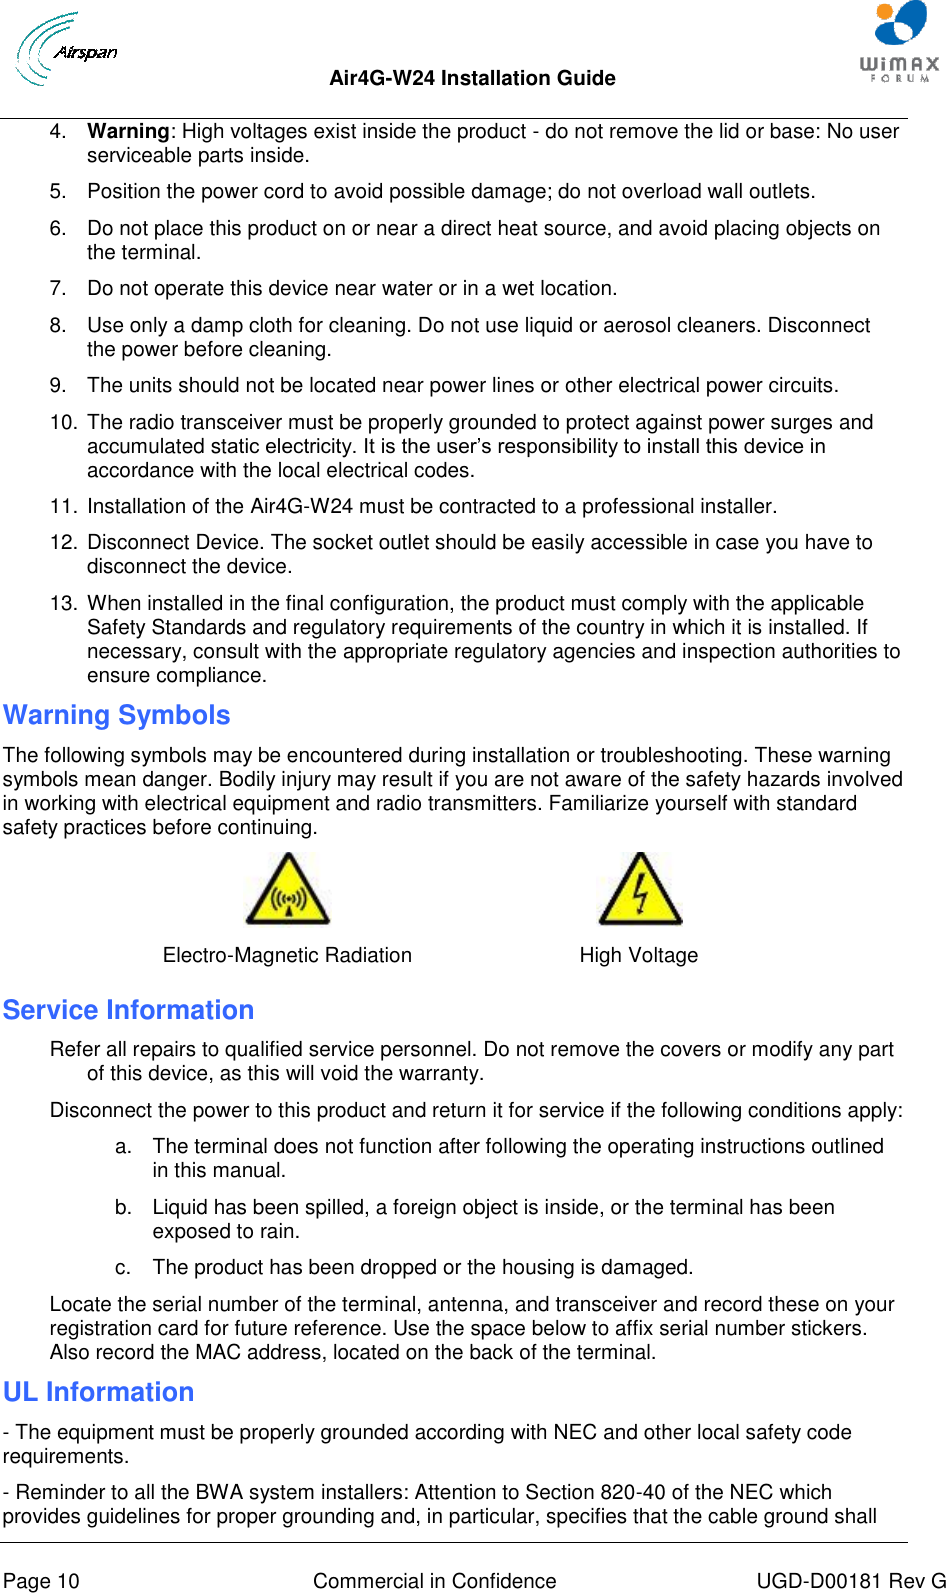  Air4G-W24 Installation Guide     Page 10  Commercial in Confidence  UGD-D00181 Rev G 4.  Warning: High voltages exist inside the product - do not remove the lid or base: No user serviceable parts inside. 5.  Position the power cord to avoid possible damage; do not overload wall outlets. 6.  Do not place this product on or near a direct heat source, and avoid placing objects on the terminal. 7.  Do not operate this device near water or in a wet location. 8.  Use only a damp cloth for cleaning. Do not use liquid or aerosol cleaners. Disconnect the power before cleaning. 9.  The units should not be located near power lines or other electrical power circuits. 10. The radio transceiver must be properly grounded to protect against power surges and accumulated static electricity. It is the user‟s responsibility to install this device in accordance with the local electrical codes.  11. Installation of the Air4G-W24 must be contracted to a professional installer.  12. Disconnect Device. The socket outlet should be easily accessible in case you have to disconnect the device. 13. When installed in the final configuration, the product must comply with the applicable Safety Standards and regulatory requirements of the country in which it is installed. If necessary, consult with the appropriate regulatory agencies and inspection authorities to ensure compliance. Warning Symbols The following symbols may be encountered during installation or troubleshooting. These warning symbols mean danger. Bodily injury may result if you are not aware of the safety hazards involved in working with electrical equipment and radio transmitters. Familiarize yourself with standard safety practices before continuing.   Electro-Magnetic Radiation High Voltage Service Information Refer all repairs to qualified service personnel. Do not remove the covers or modify any part of this device, as this will void the warranty. Disconnect the power to this product and return it for service if the following conditions apply: a.  The terminal does not function after following the operating instructions outlined in this manual. b.  Liquid has been spilled, a foreign object is inside, or the terminal has been exposed to rain. c.  The product has been dropped or the housing is damaged. Locate the serial number of the terminal, antenna, and transceiver and record these on your registration card for future reference. Use the space below to affix serial number stickers. Also record the MAC address, located on the back of the terminal. UL Information - The equipment must be properly grounded according with NEC and other local safety code requirements. - Reminder to all the BWA system installers: Attention to Section 820-40 of the NEC which provides guidelines for proper grounding and, in particular, specifies that the cable ground shall 